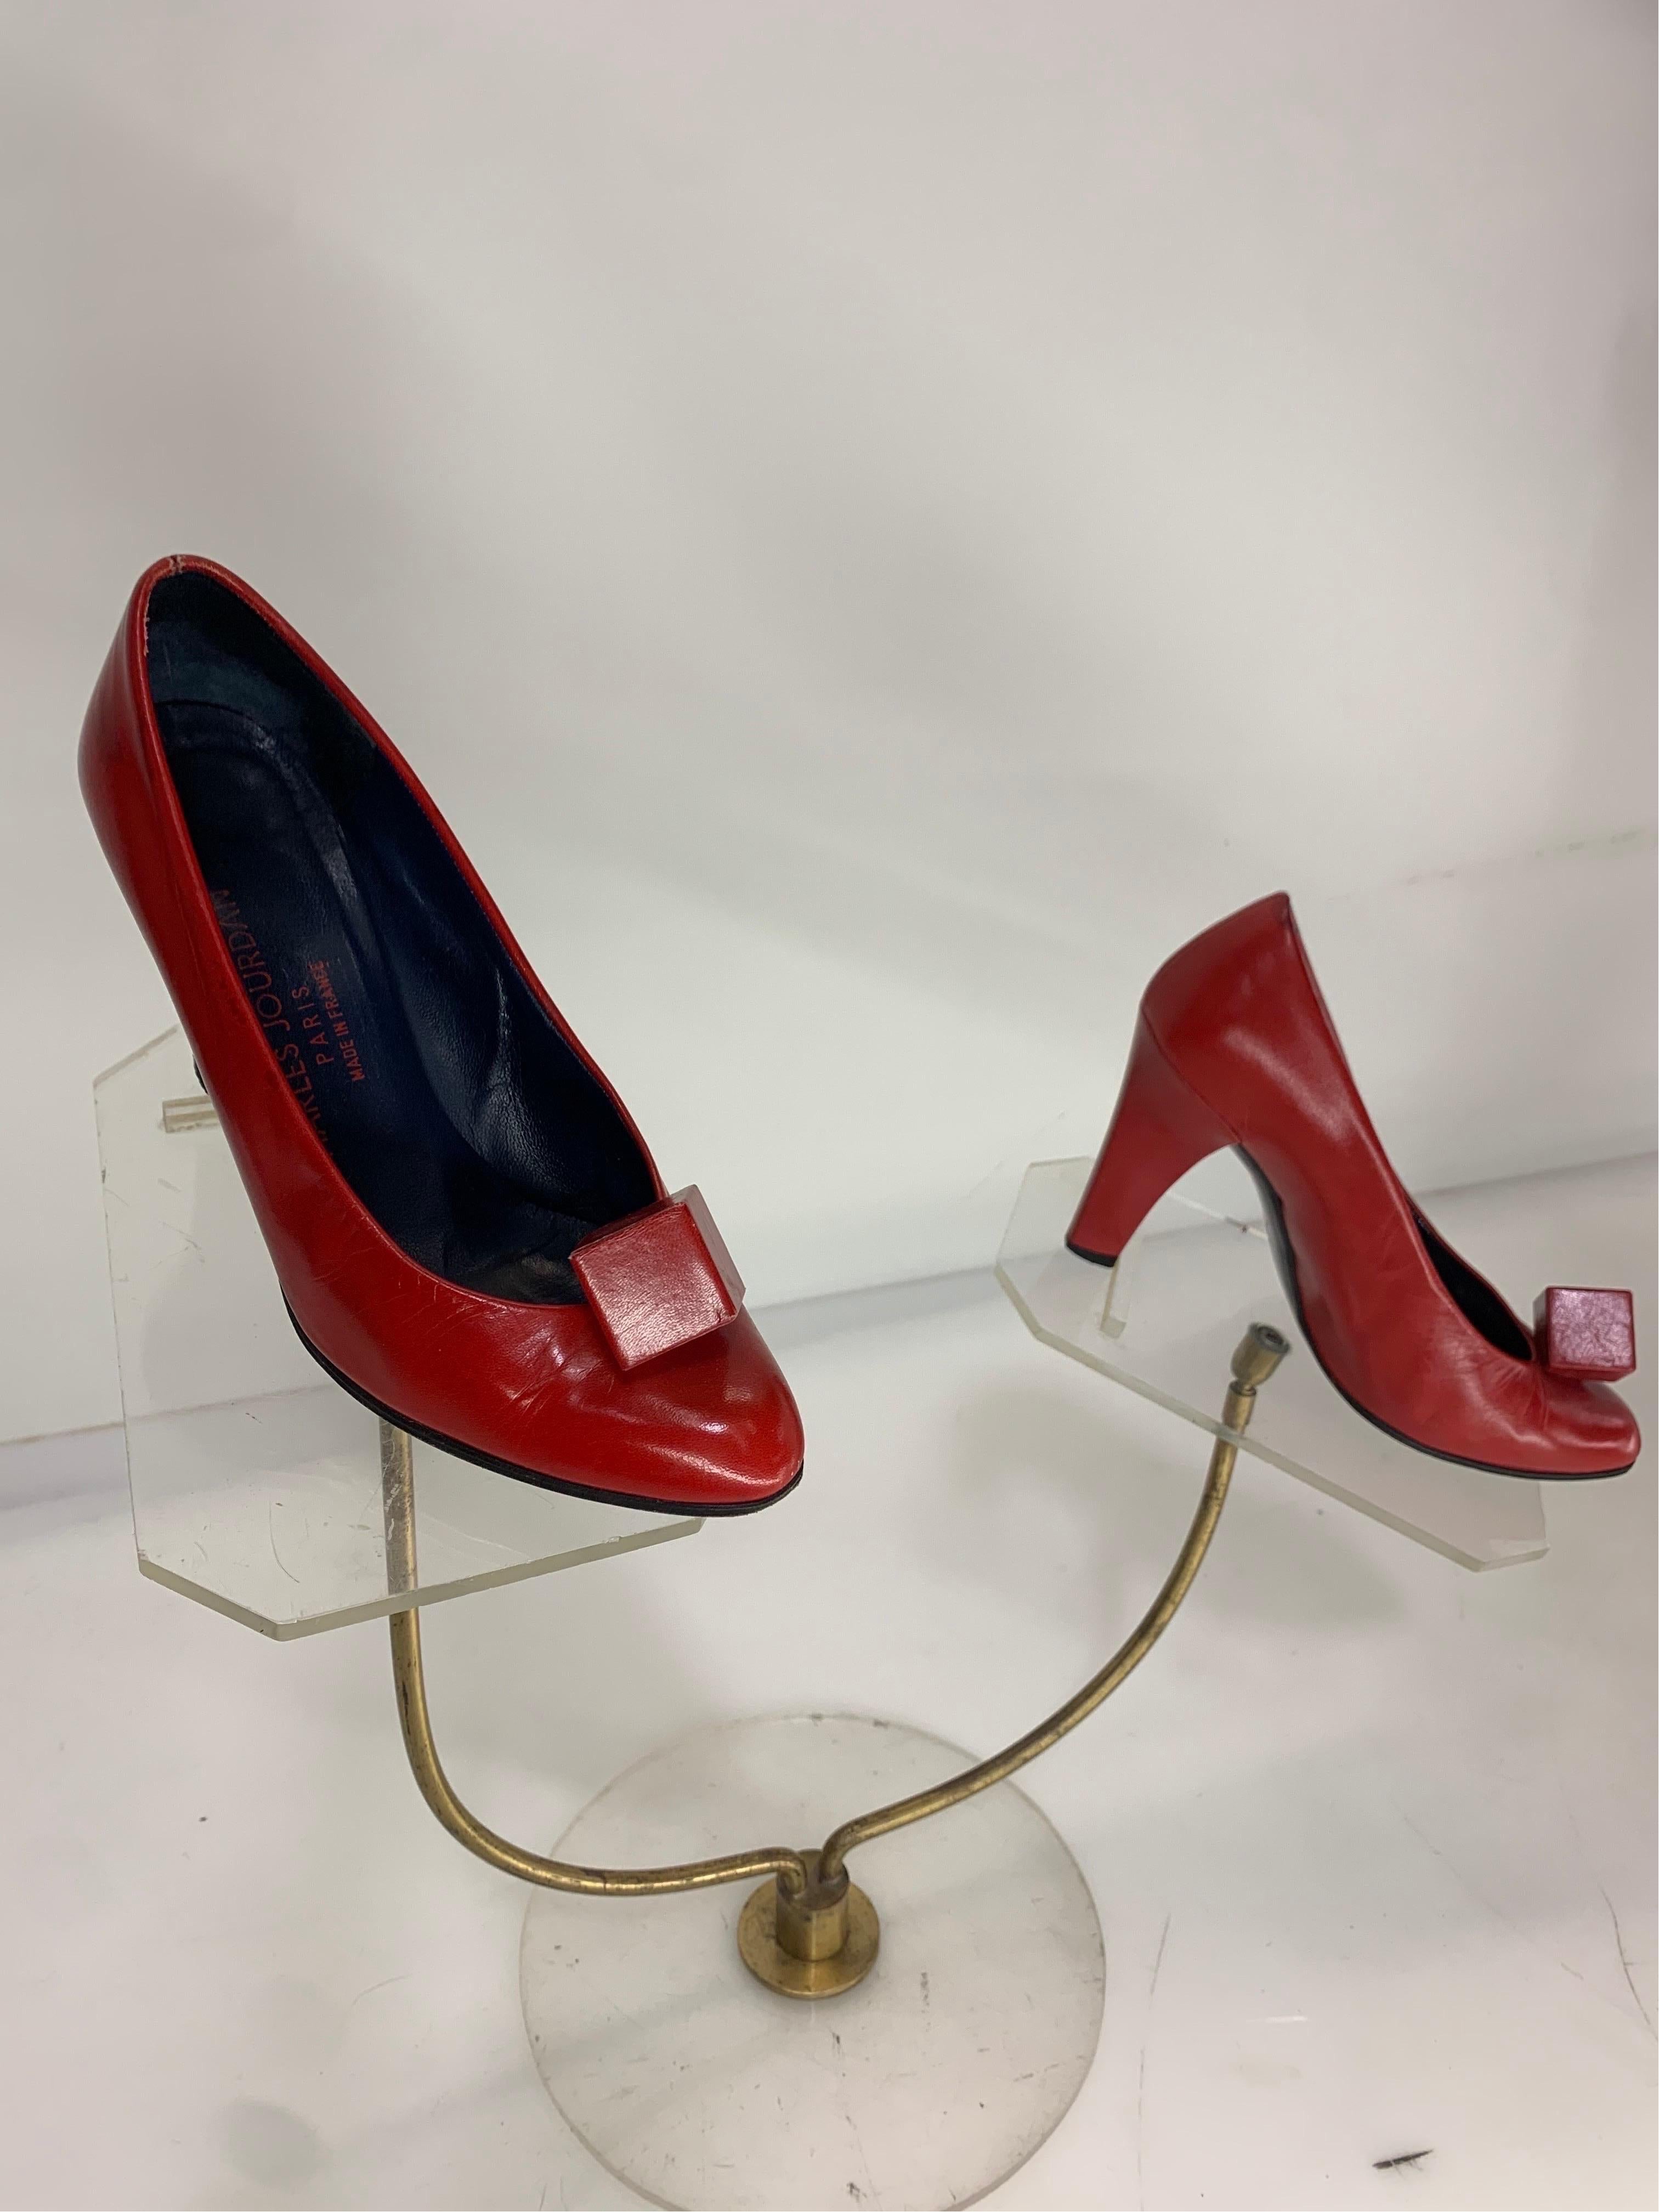 1970 Charles Jourdan Crimson Red High Heeled Pumps w/ Signature Cube Ornament For Sale 3